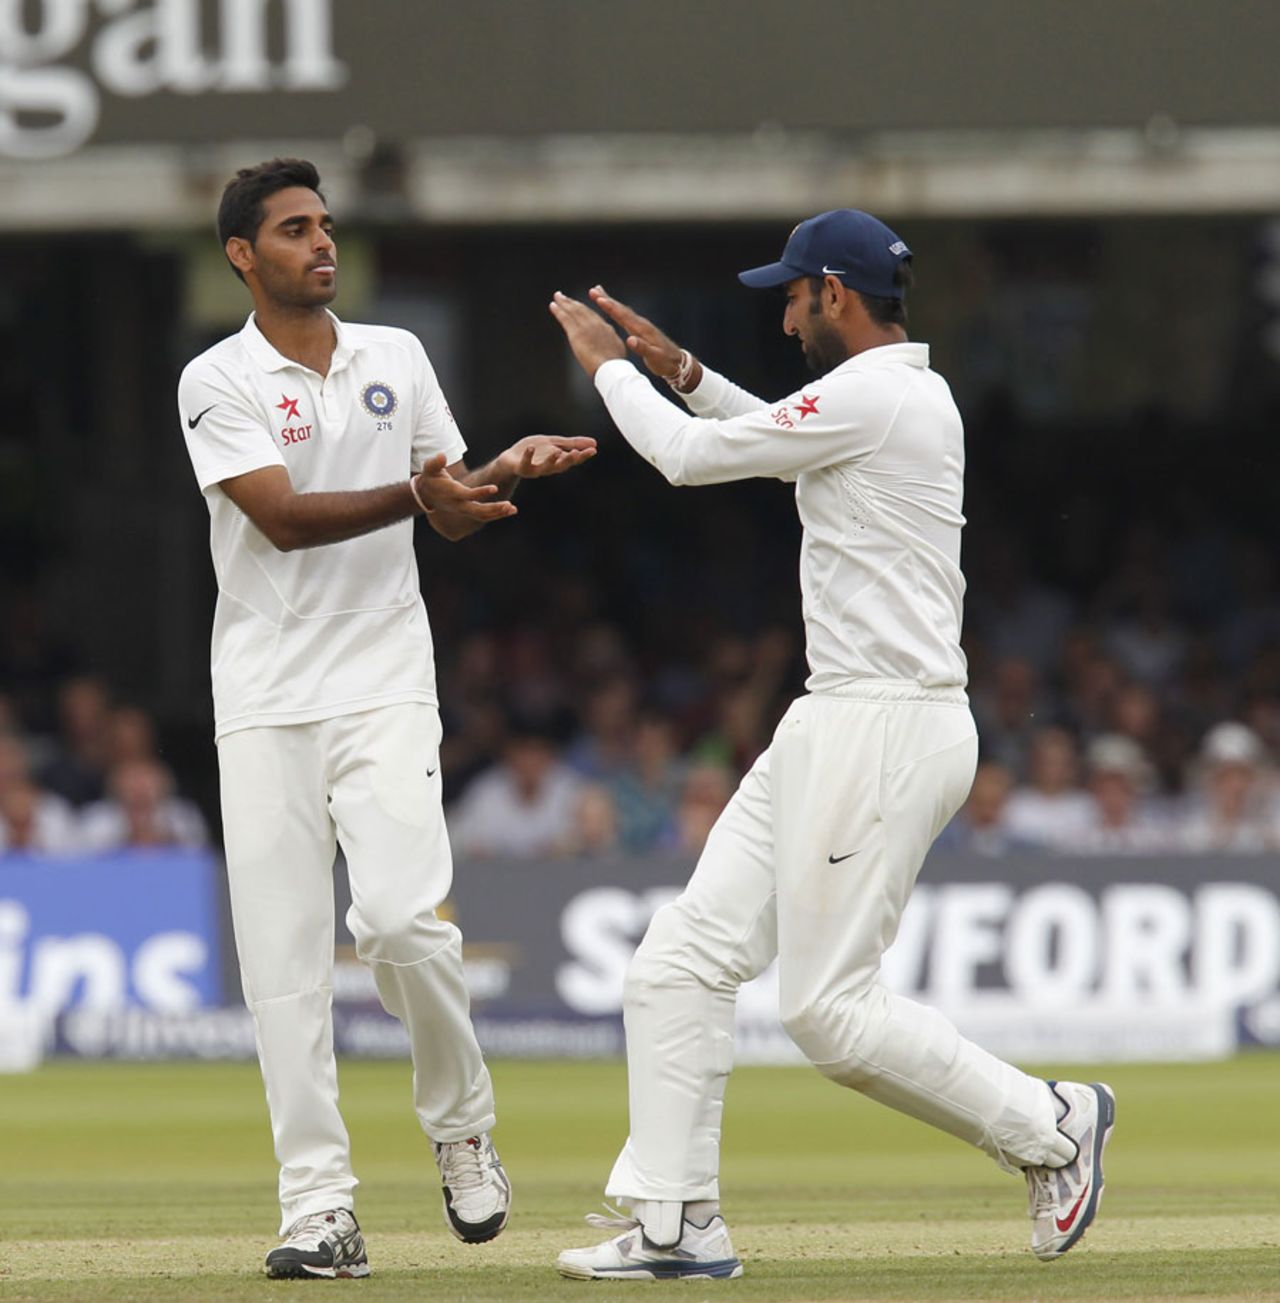 Bhuvneshwar Kumar picked up six wickets, England v India, 2nd Investec Test, Lord's, 3rd day, July 19, 2014